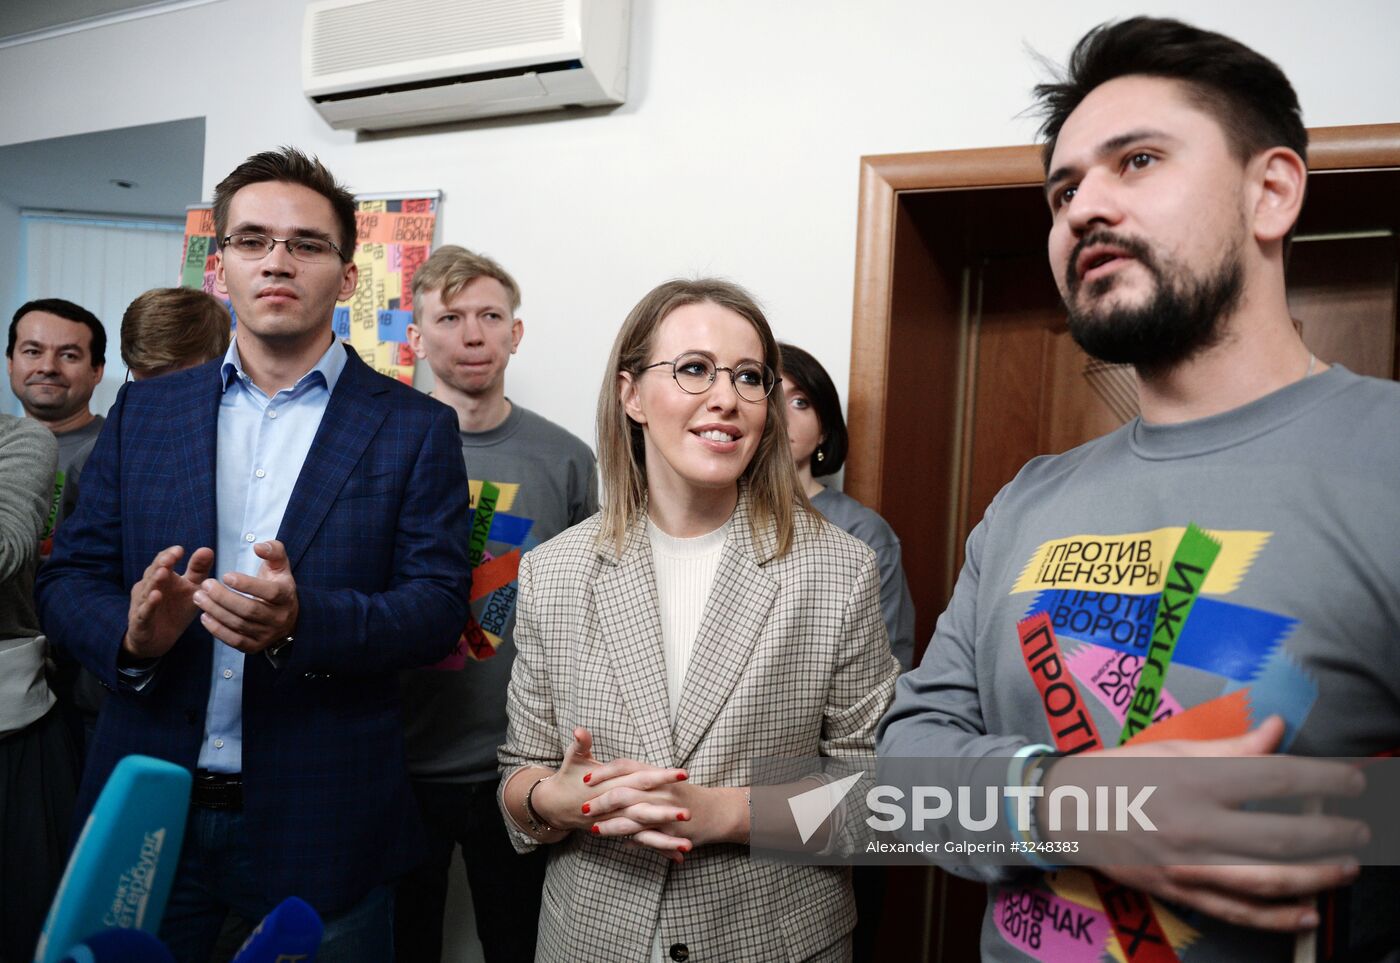 Ksenia Sobchak launches election campaign headquarters in St. Petersburg